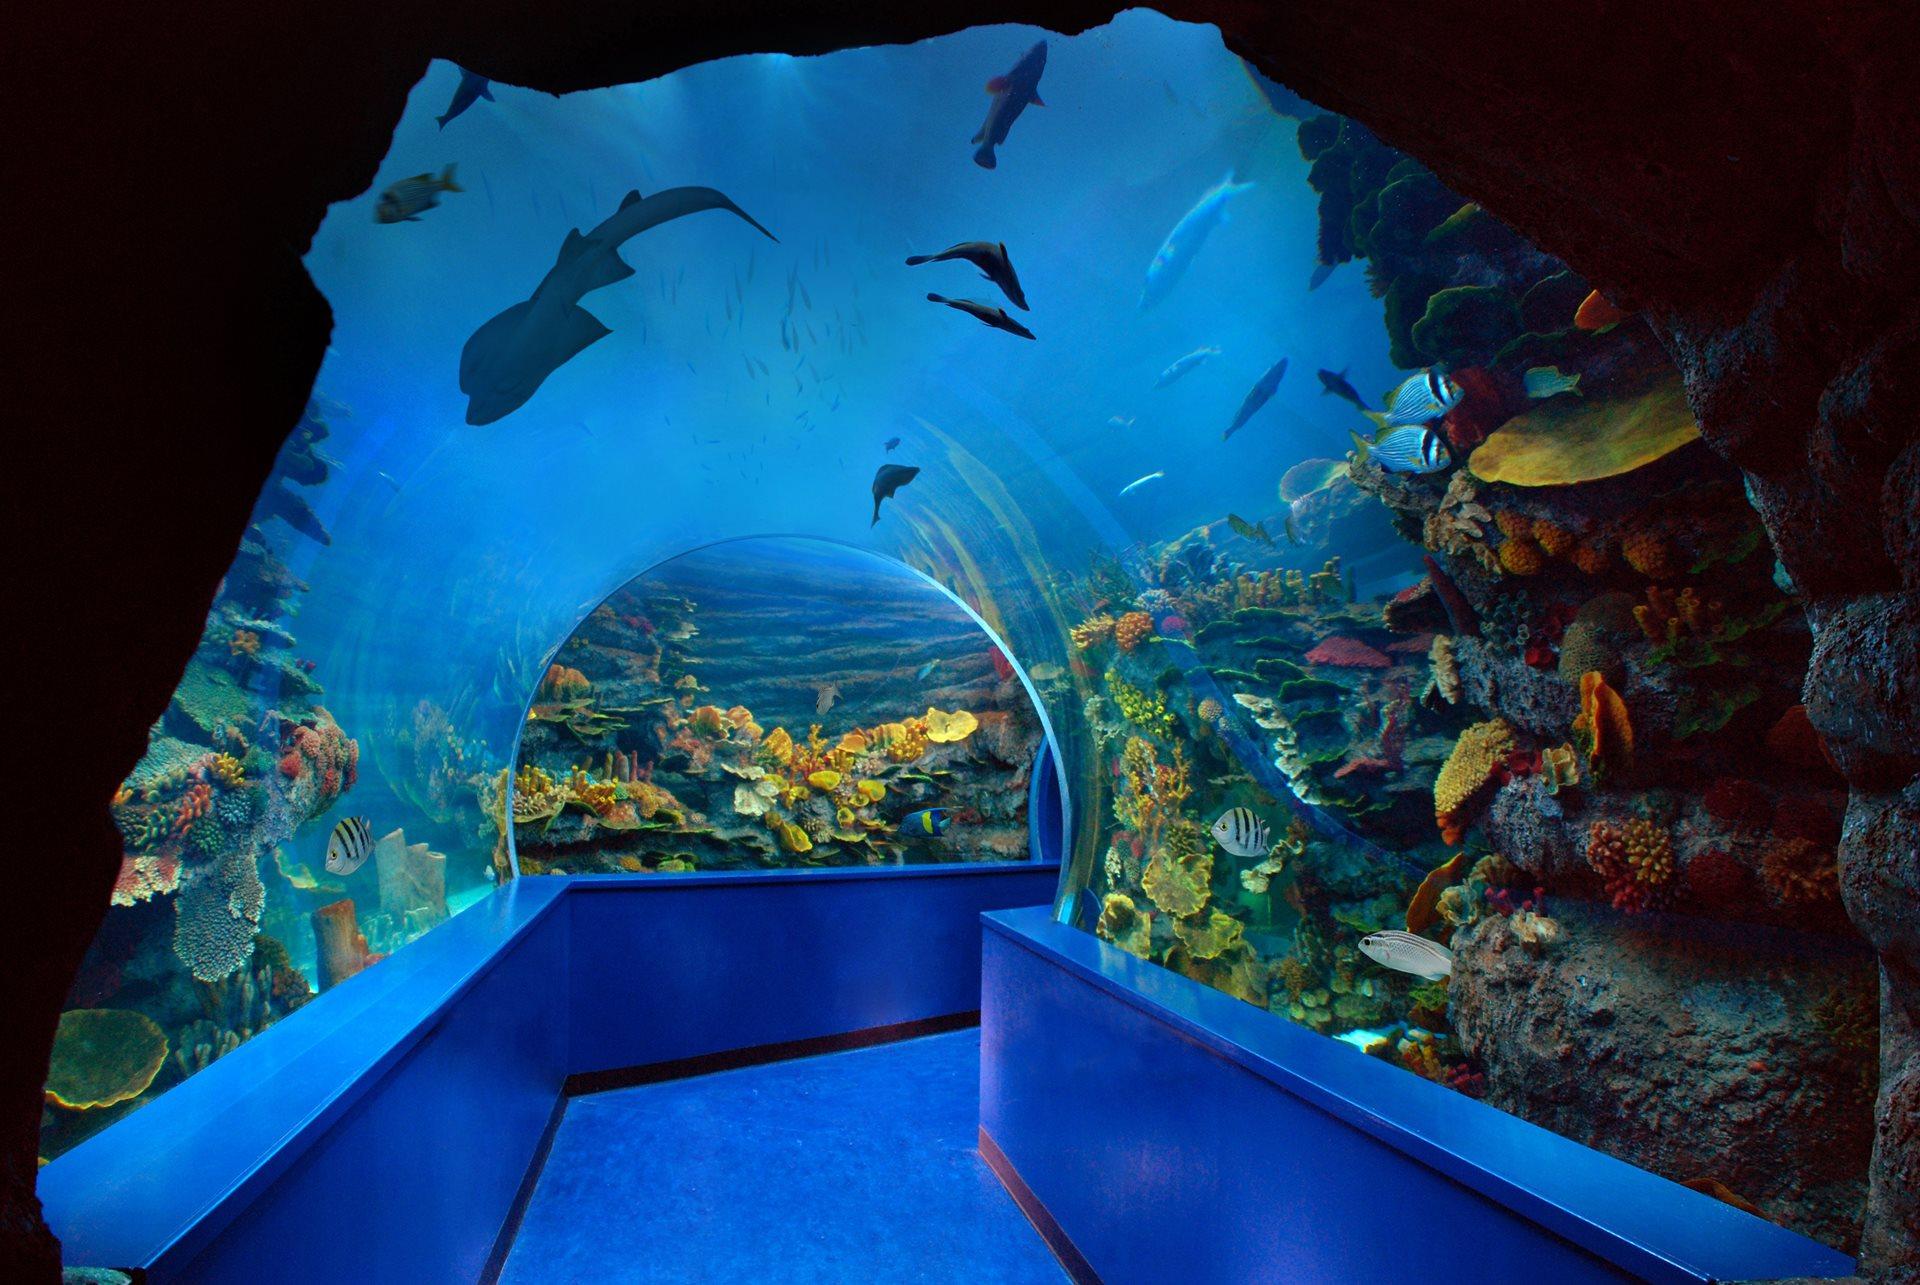 Experience Sharja's local marine life and attractions